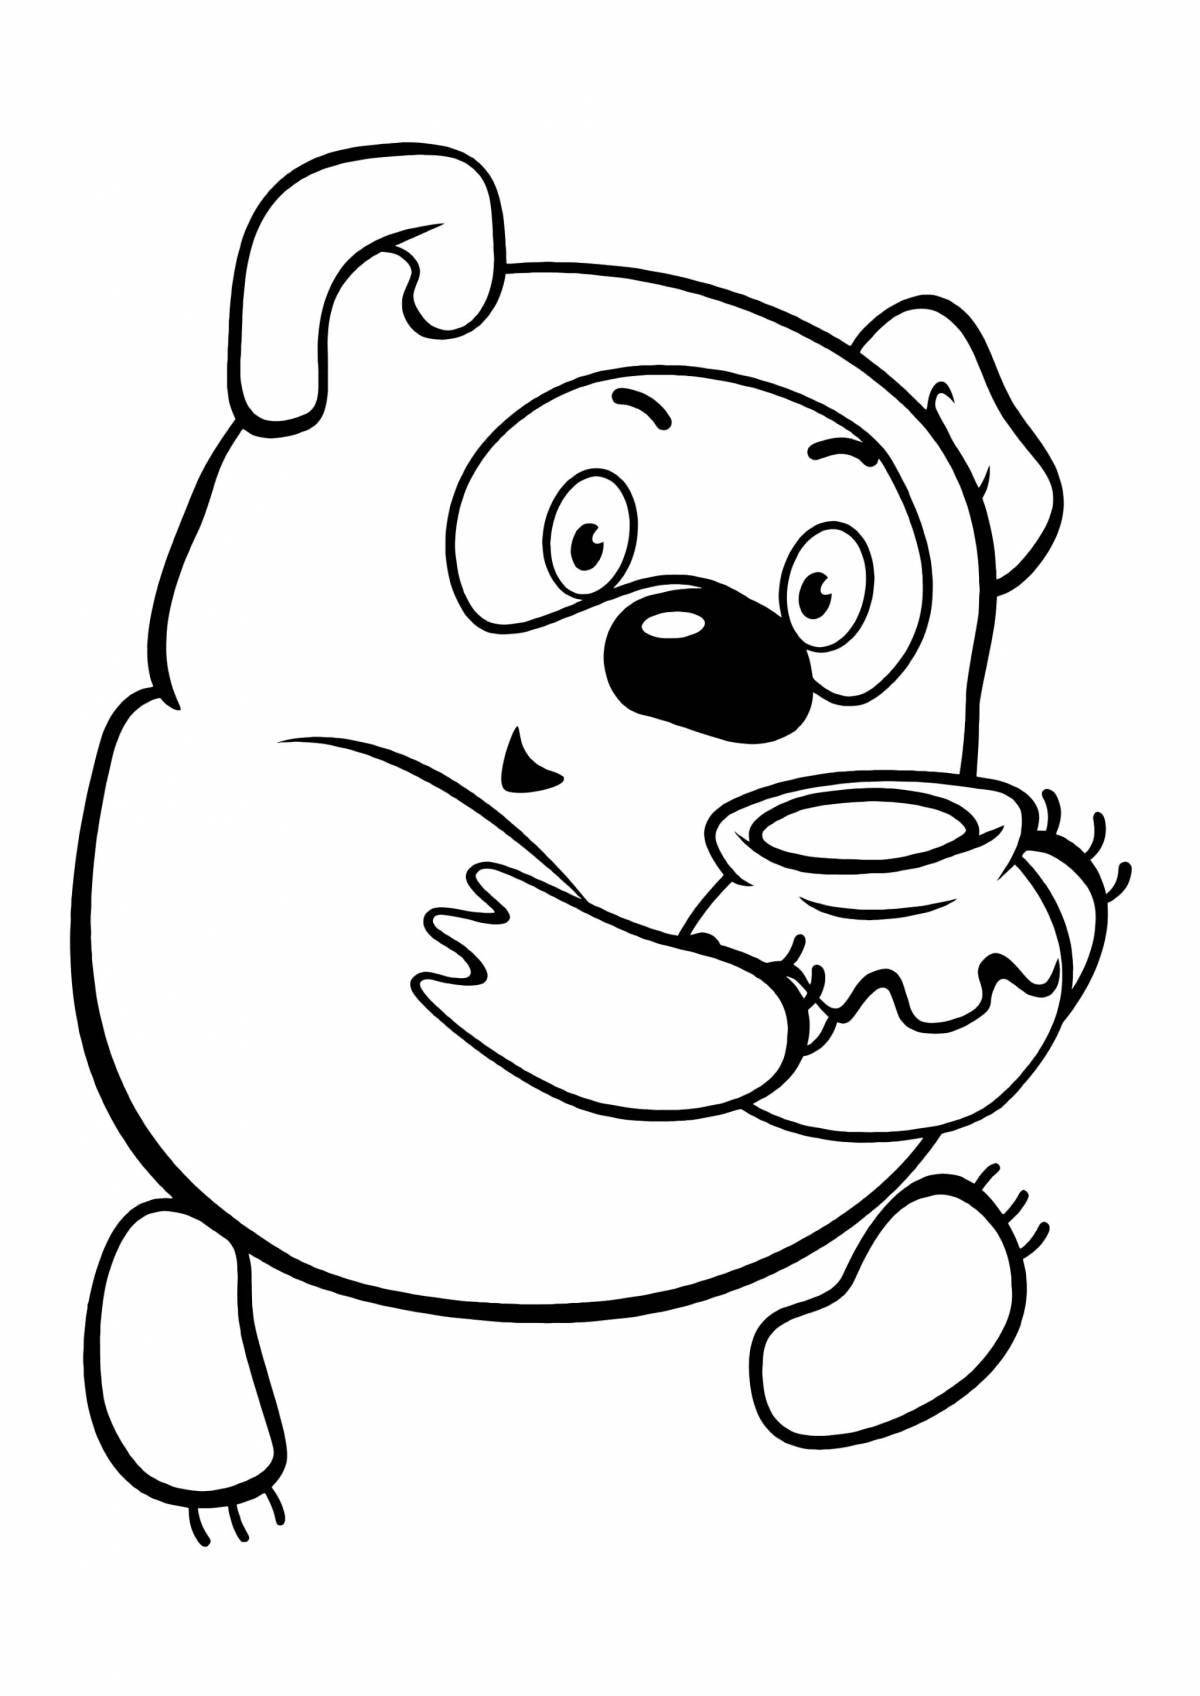 Bright bear coloring pages